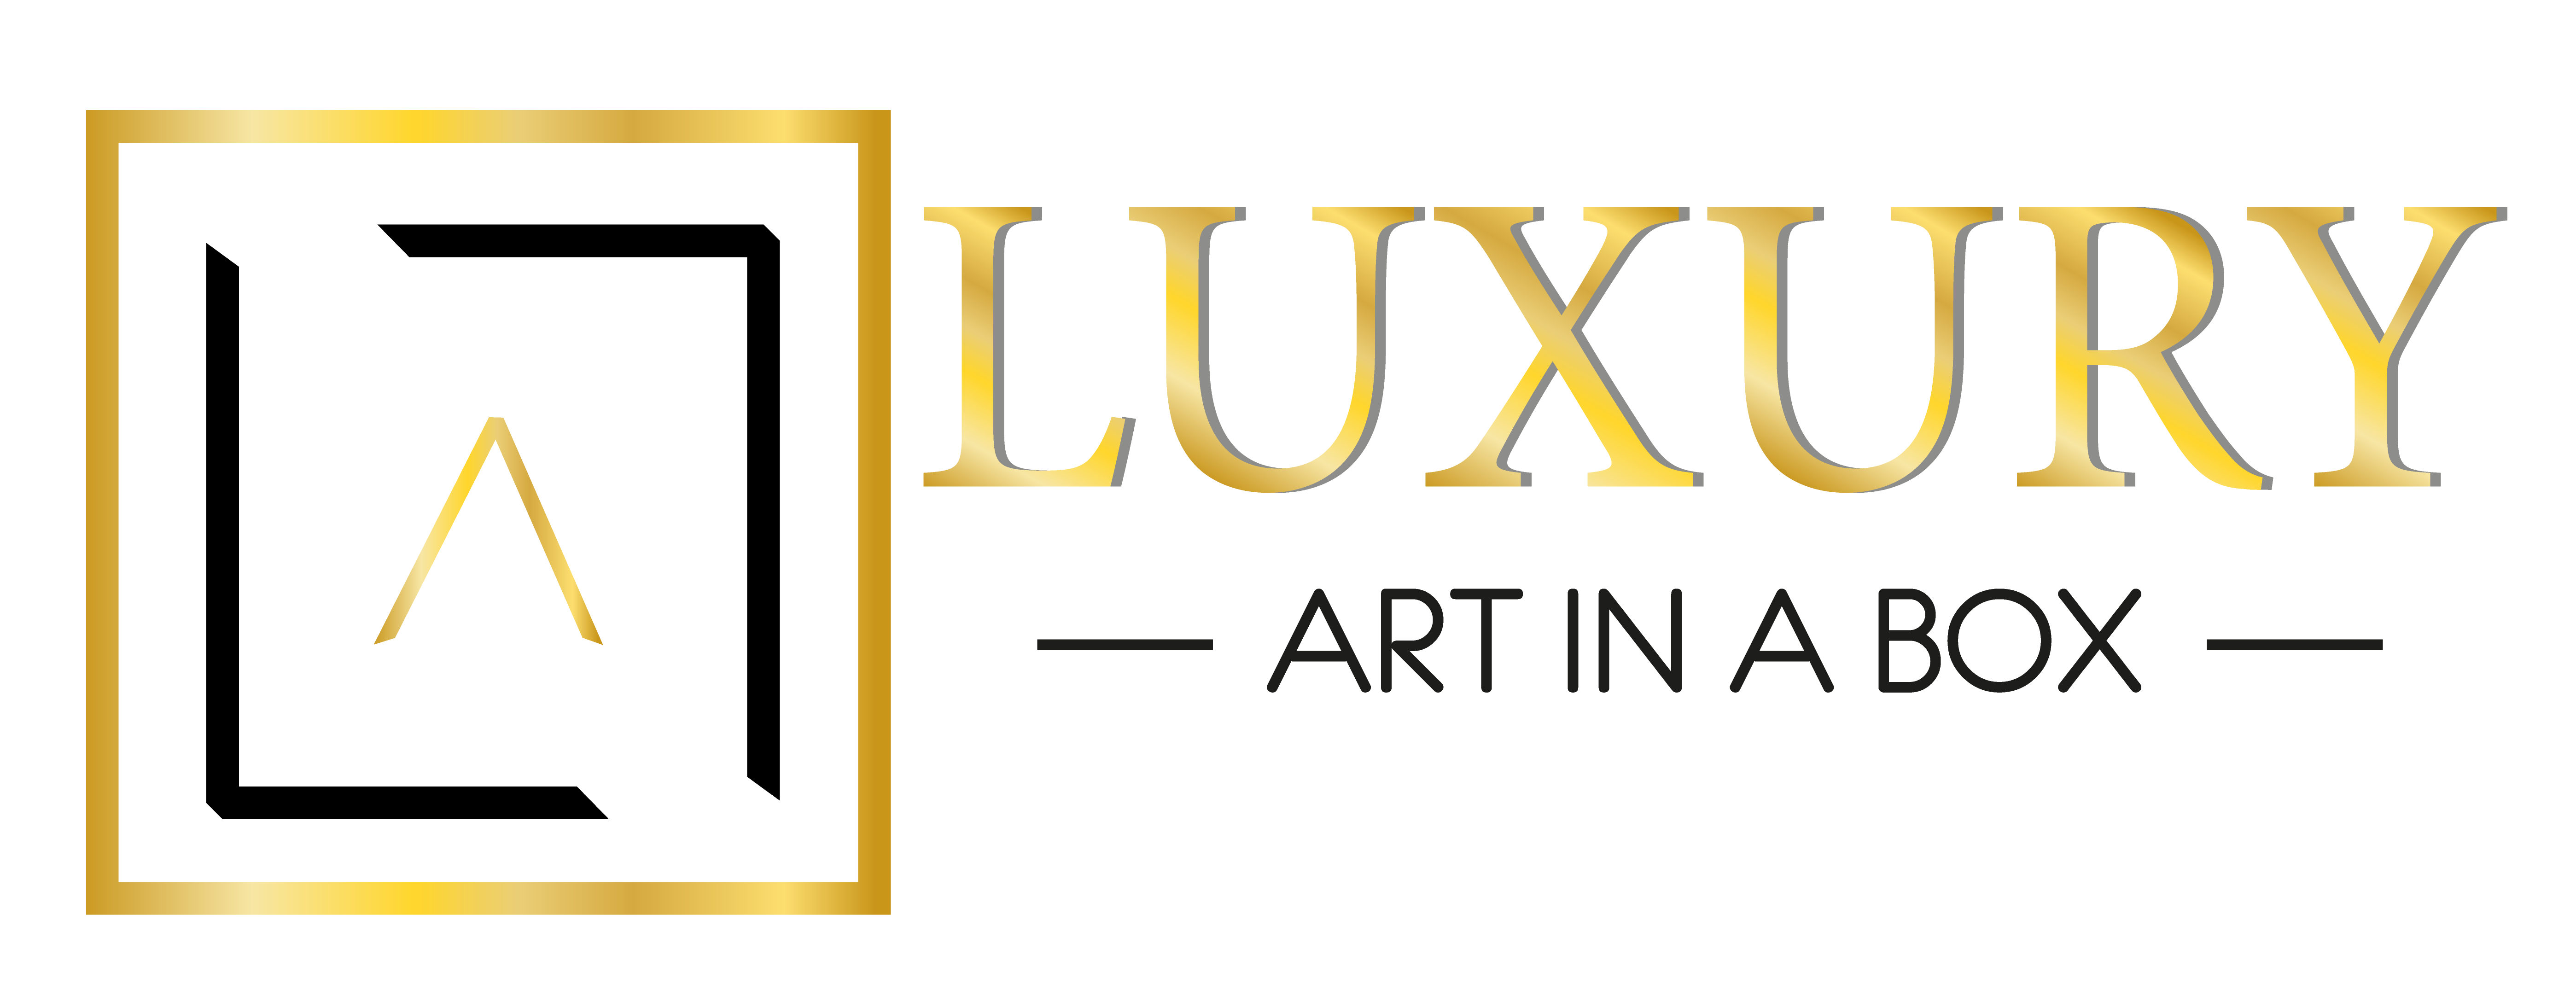 Boxes - Art of Living Luxury Collection